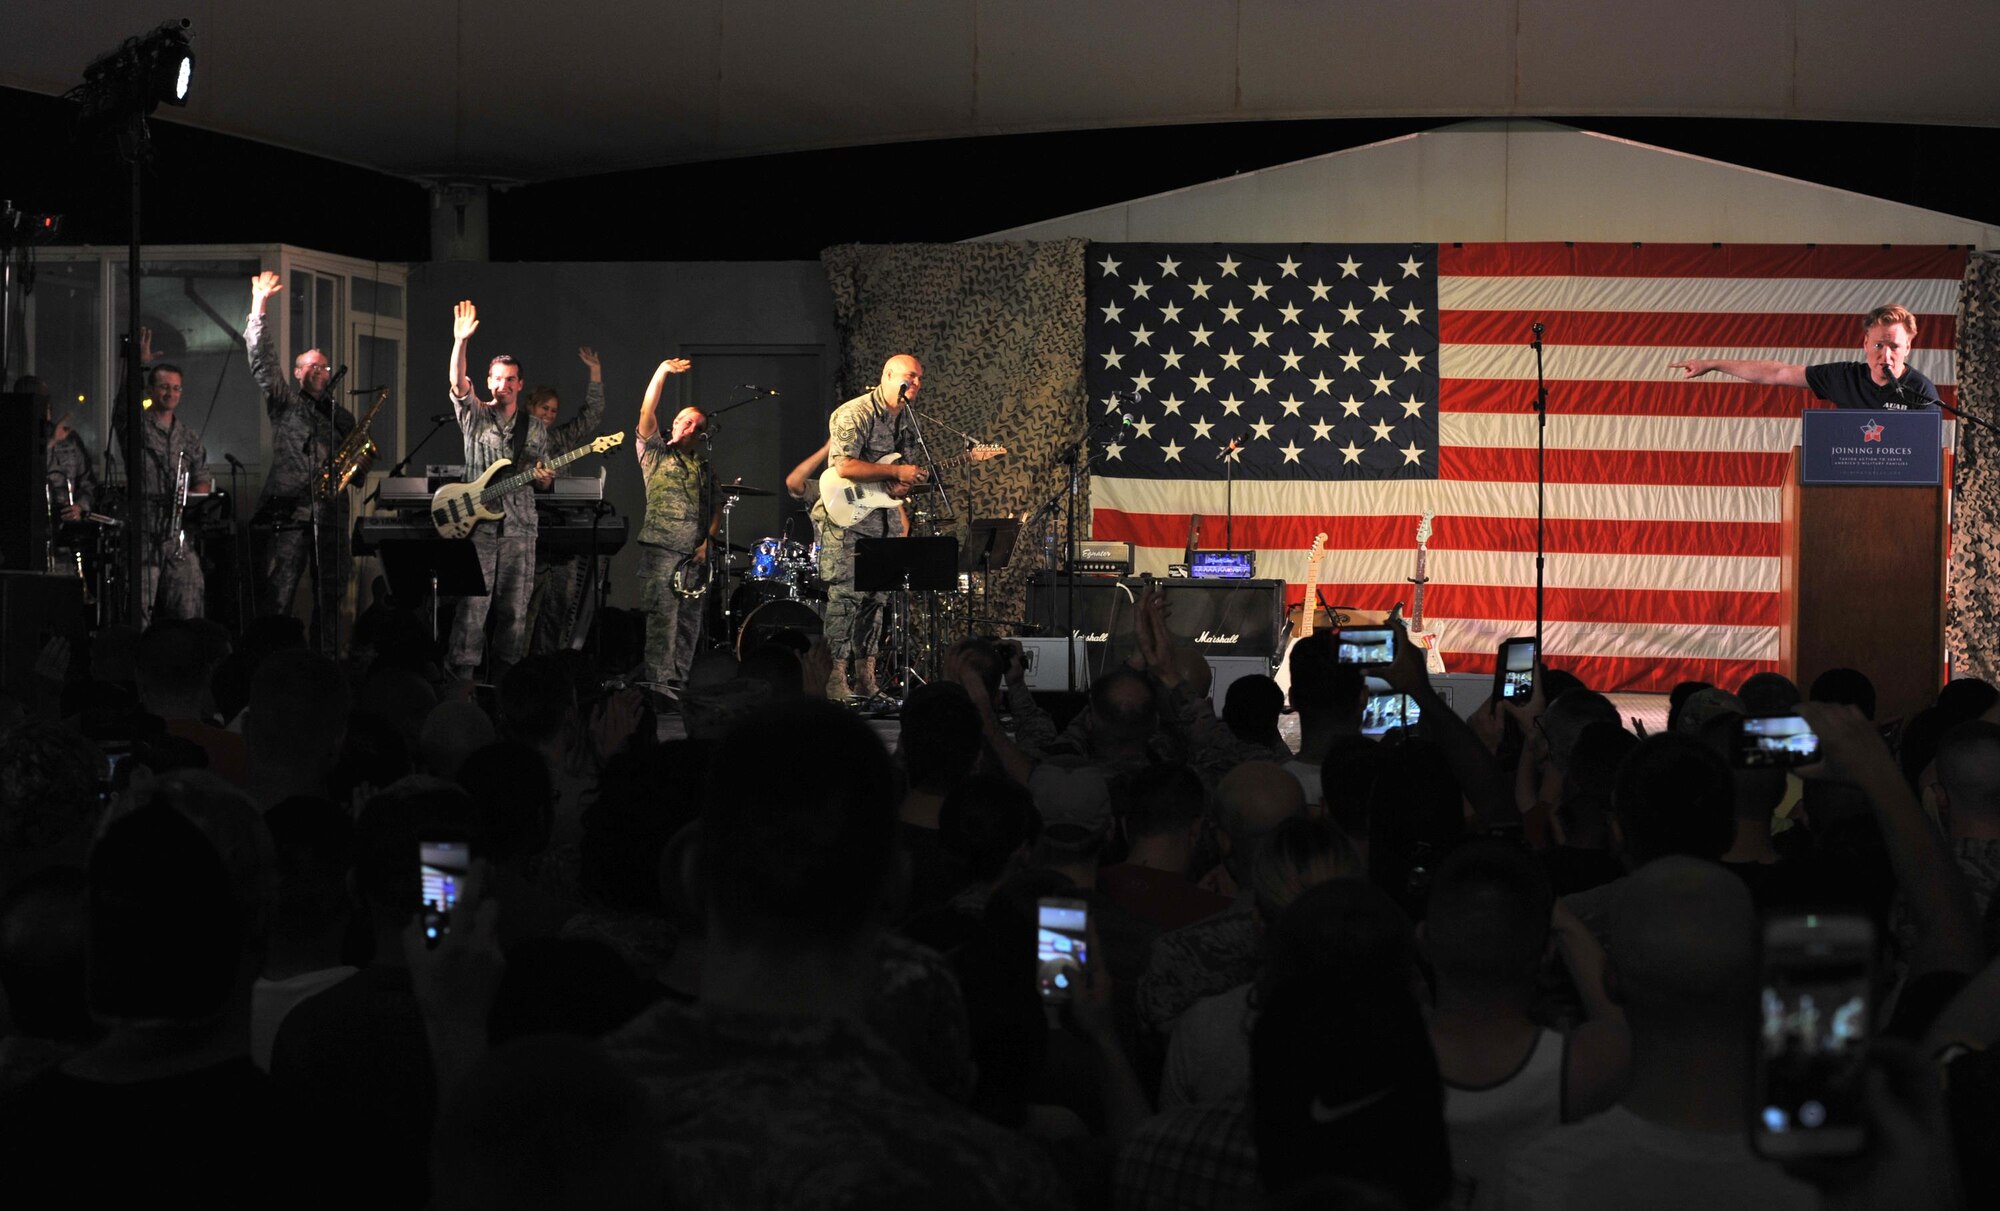 Conan O'Brien, O'Brien's house band leader Jimmy Vivino, Grace Potter, and the U.S. Air Forces Central Command band play together during an event at Al Udeid Air Base, Qatar, Nov. 3, 2015. The band served as the house band during the event as well as providing backup for Potter. (U.S. Air Force photo/Tech. Sgt. Joshua Strang)